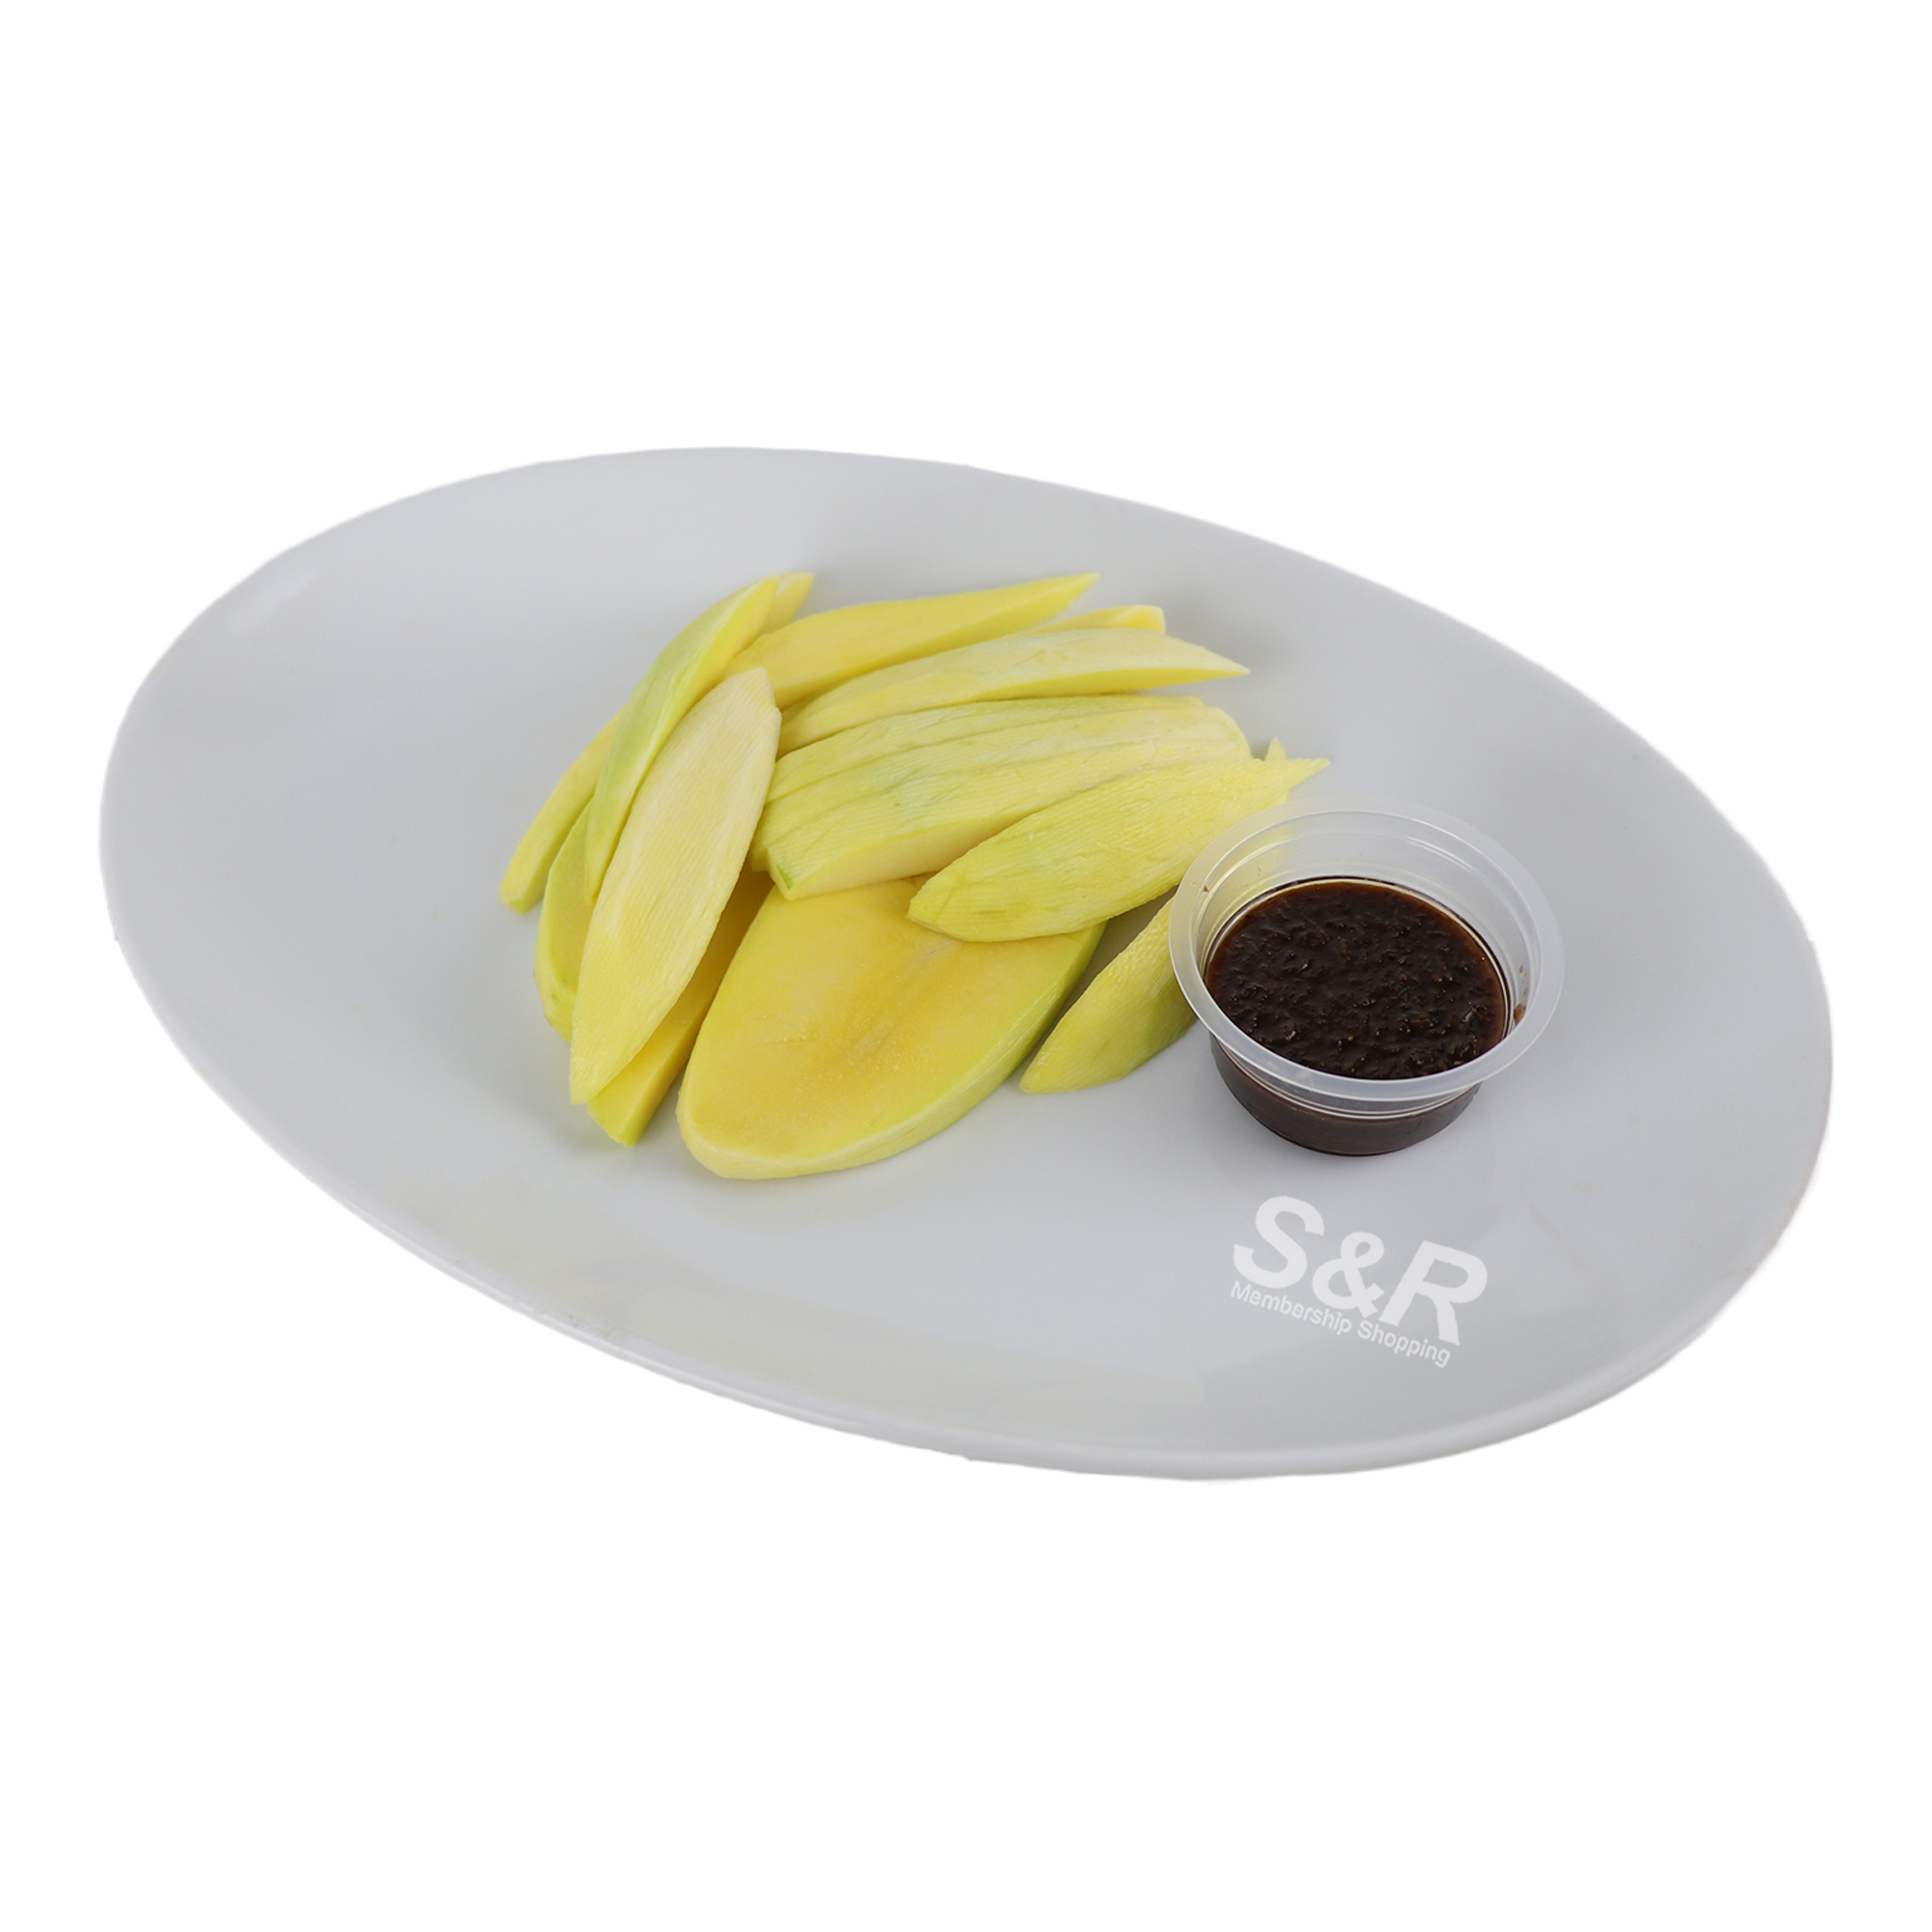 S&R Peeled Green Mango with Shrimp Paste approx. 700g